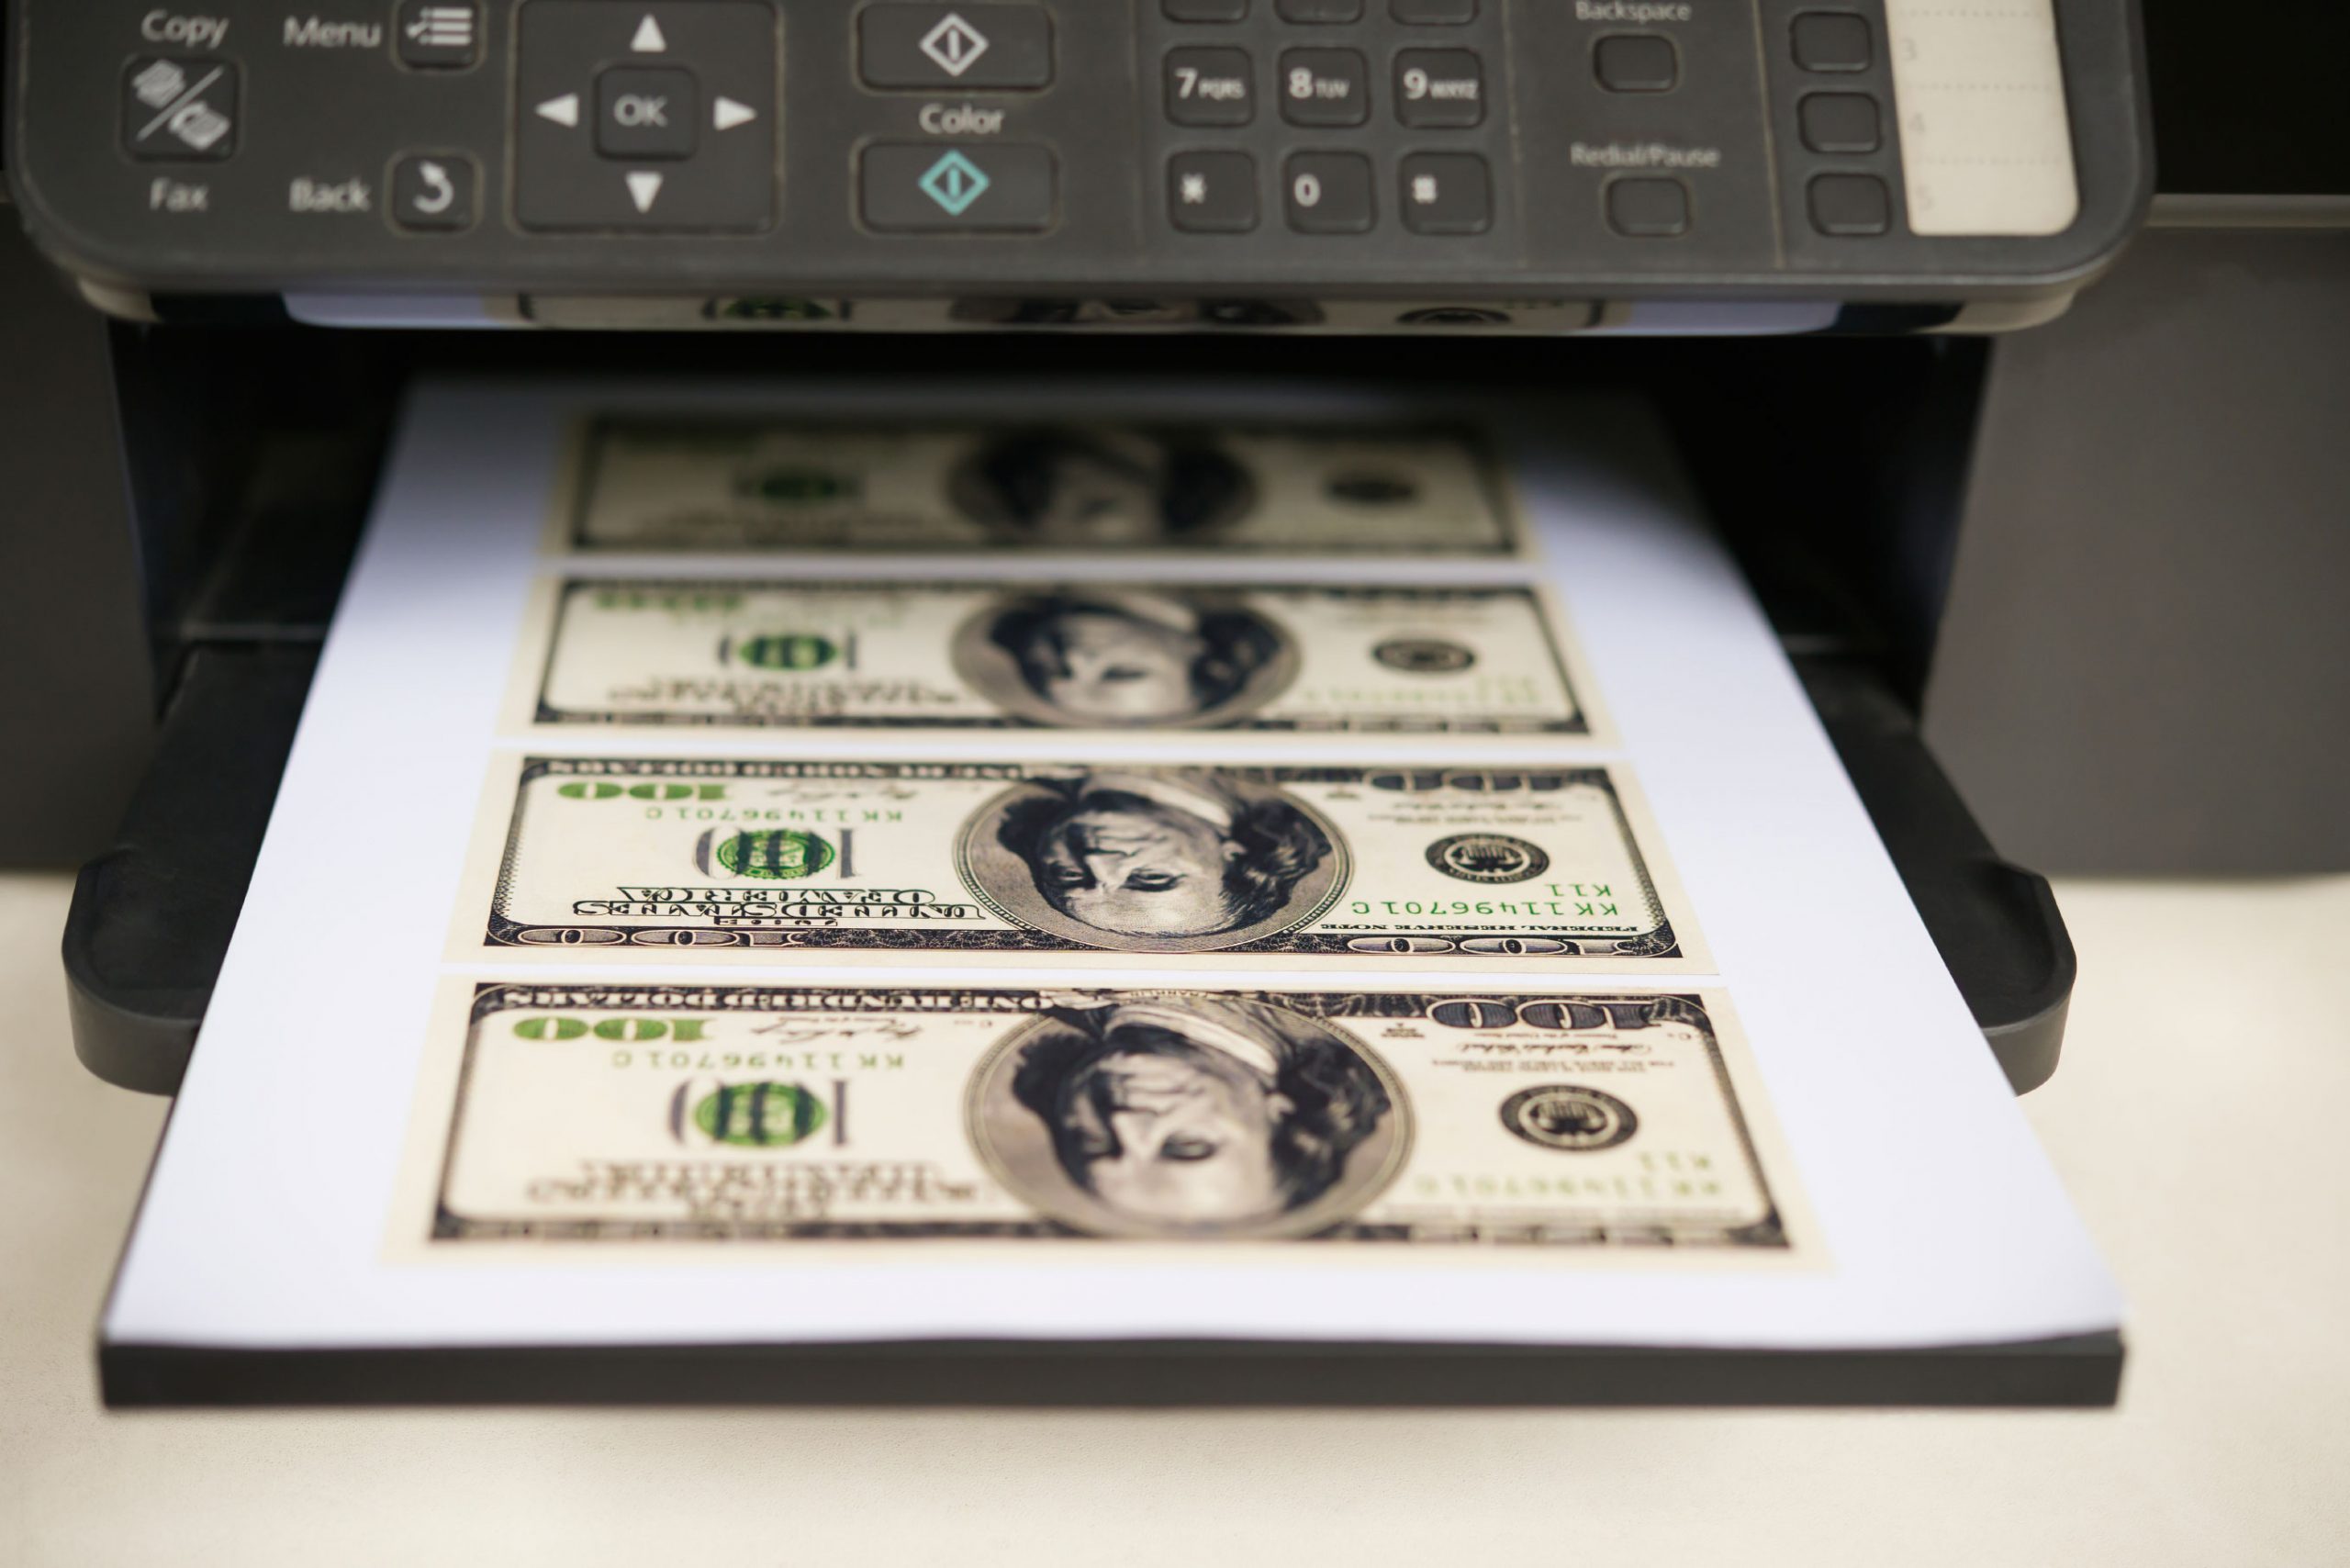 The fastest way to print money online is to offer your skills on freelance writing platforms